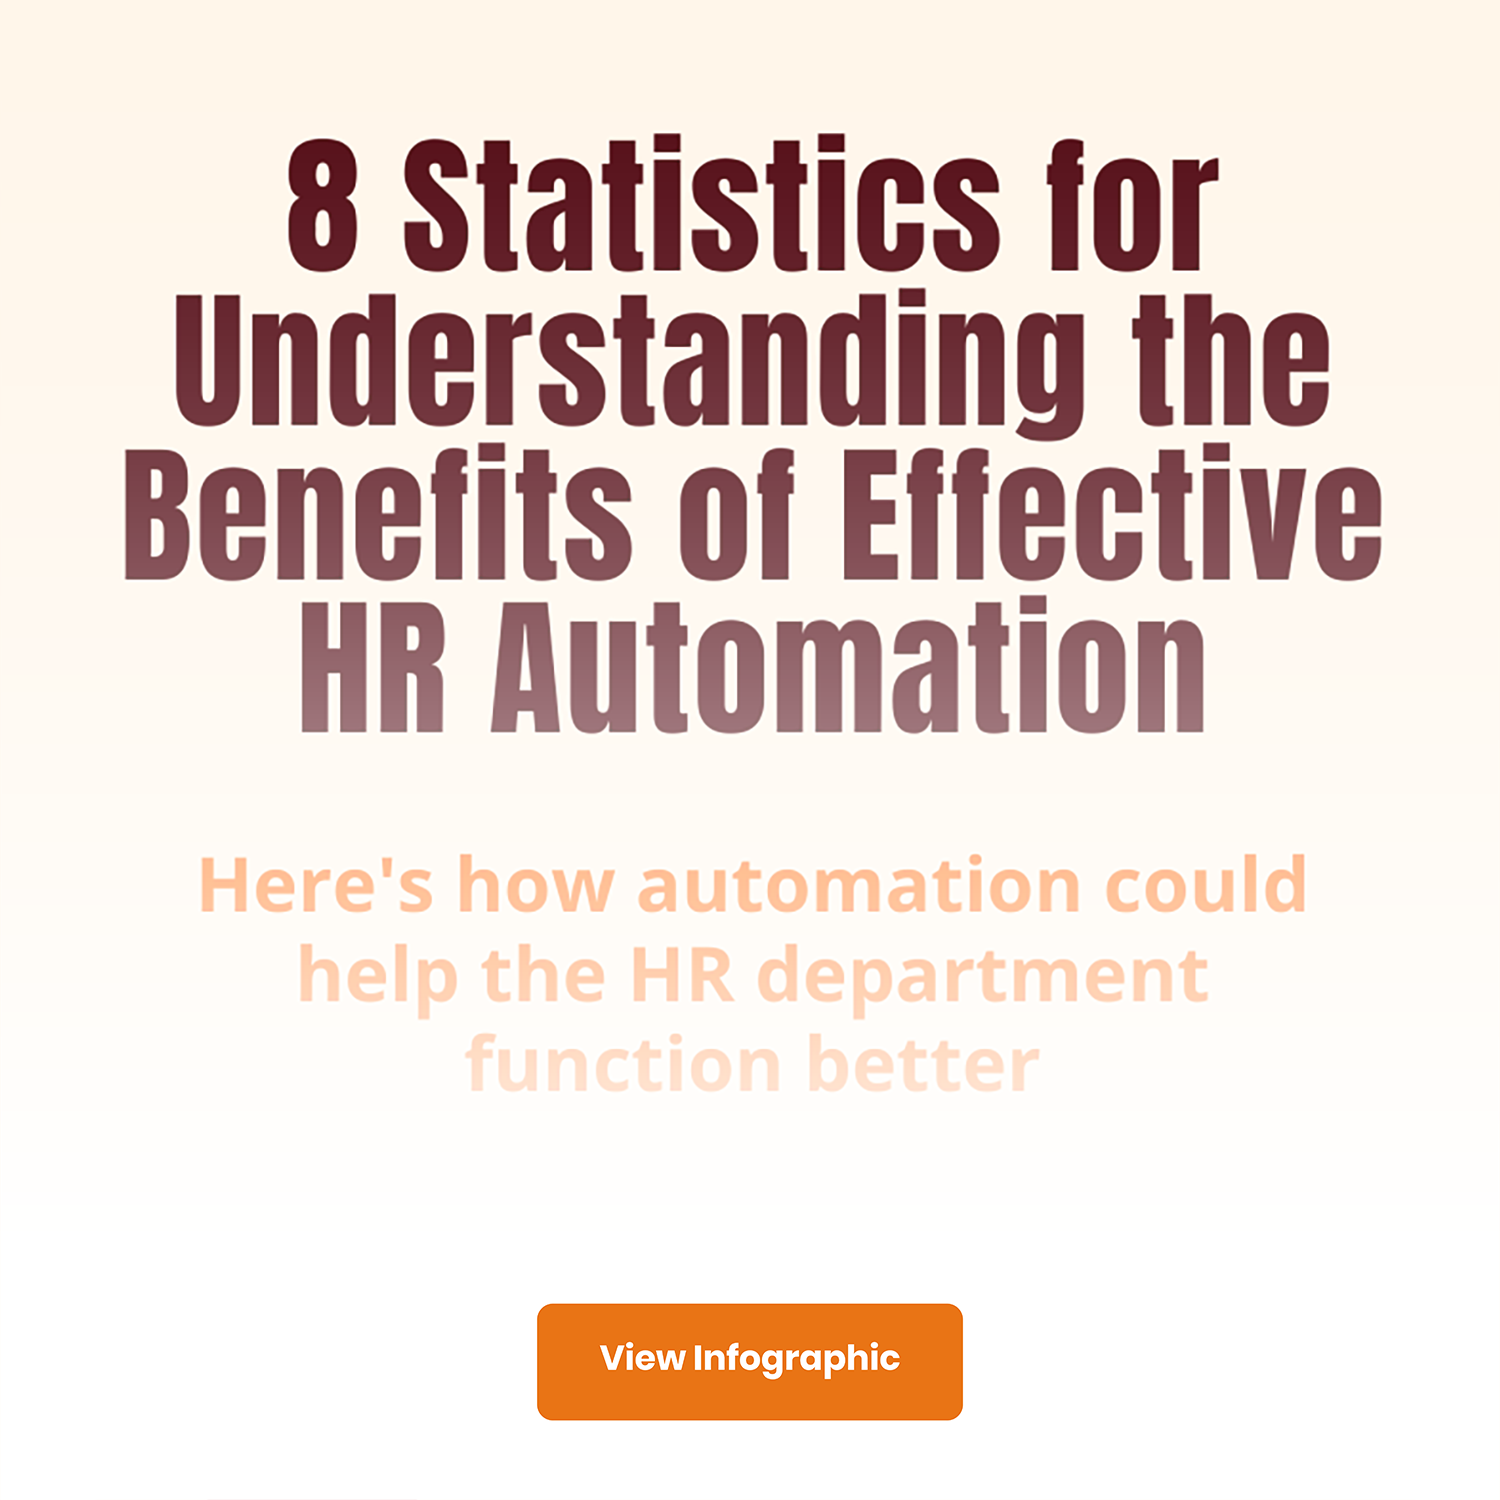 8 Statistics for Understanding the Benefits of Effective HR Automation-Infographic